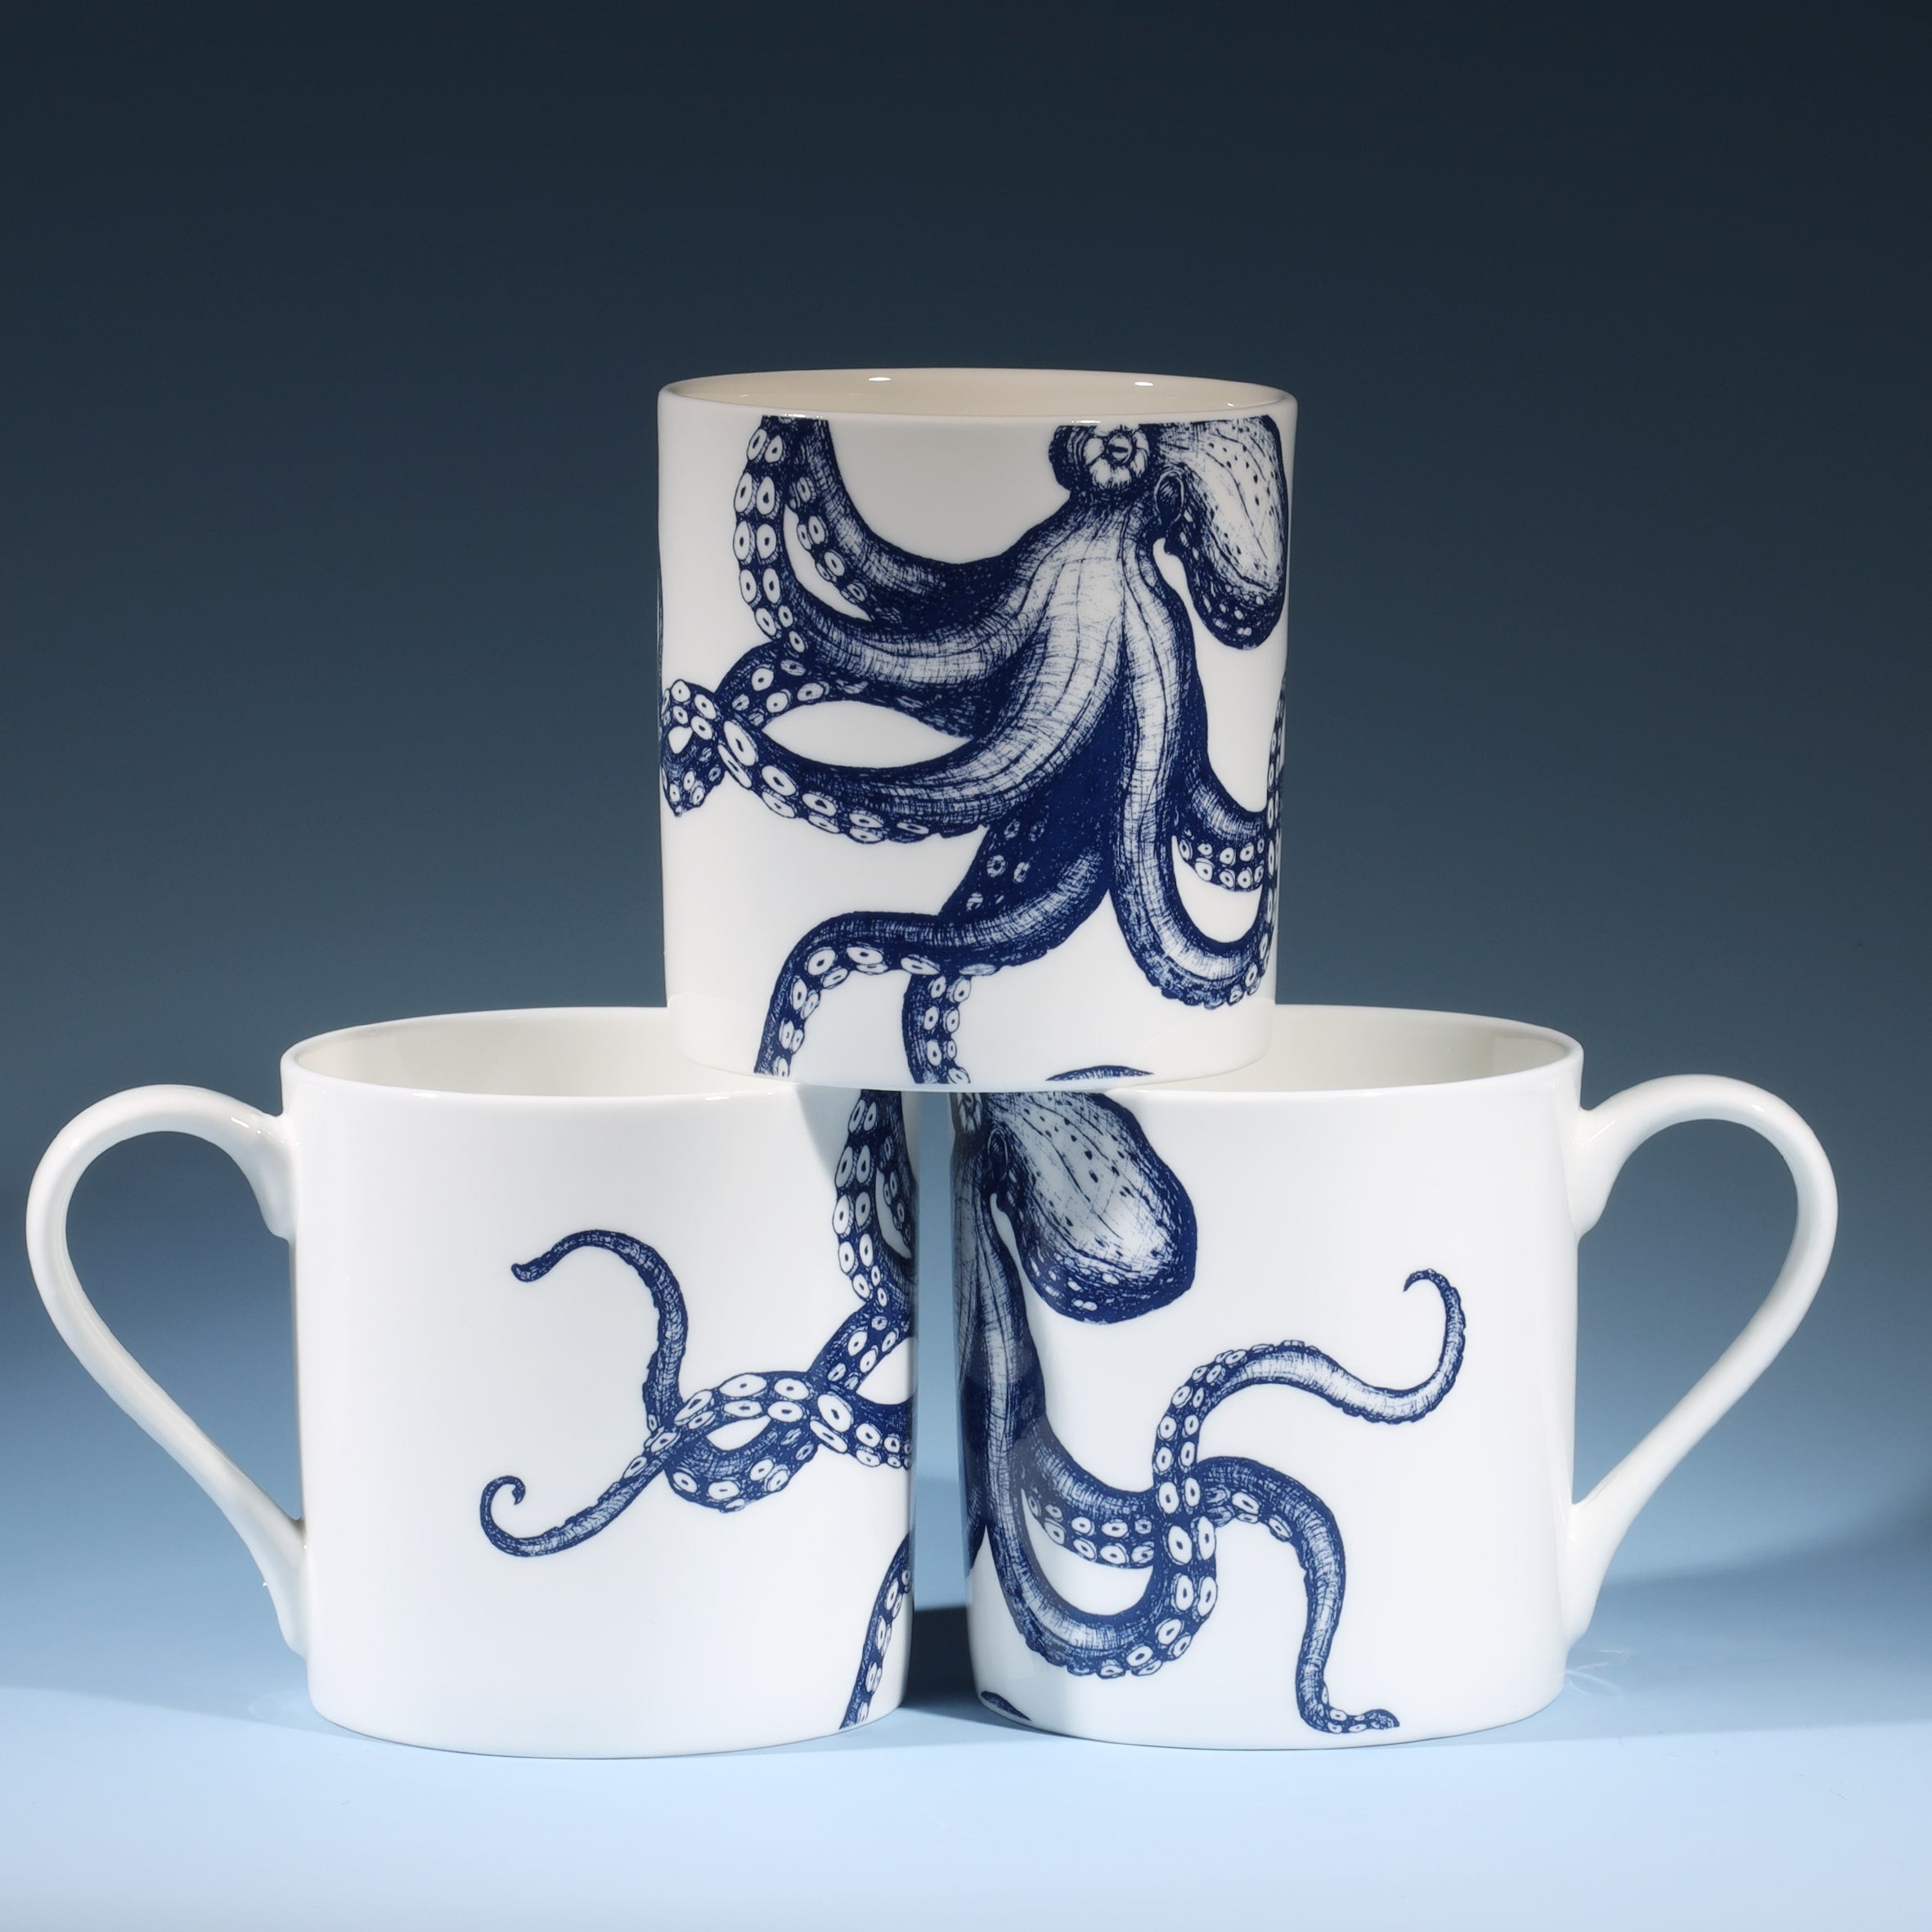 The photo shows a Bone china  mug featuring a hand drawn octopus design in classic  blue and white in a stack of three showing all sides